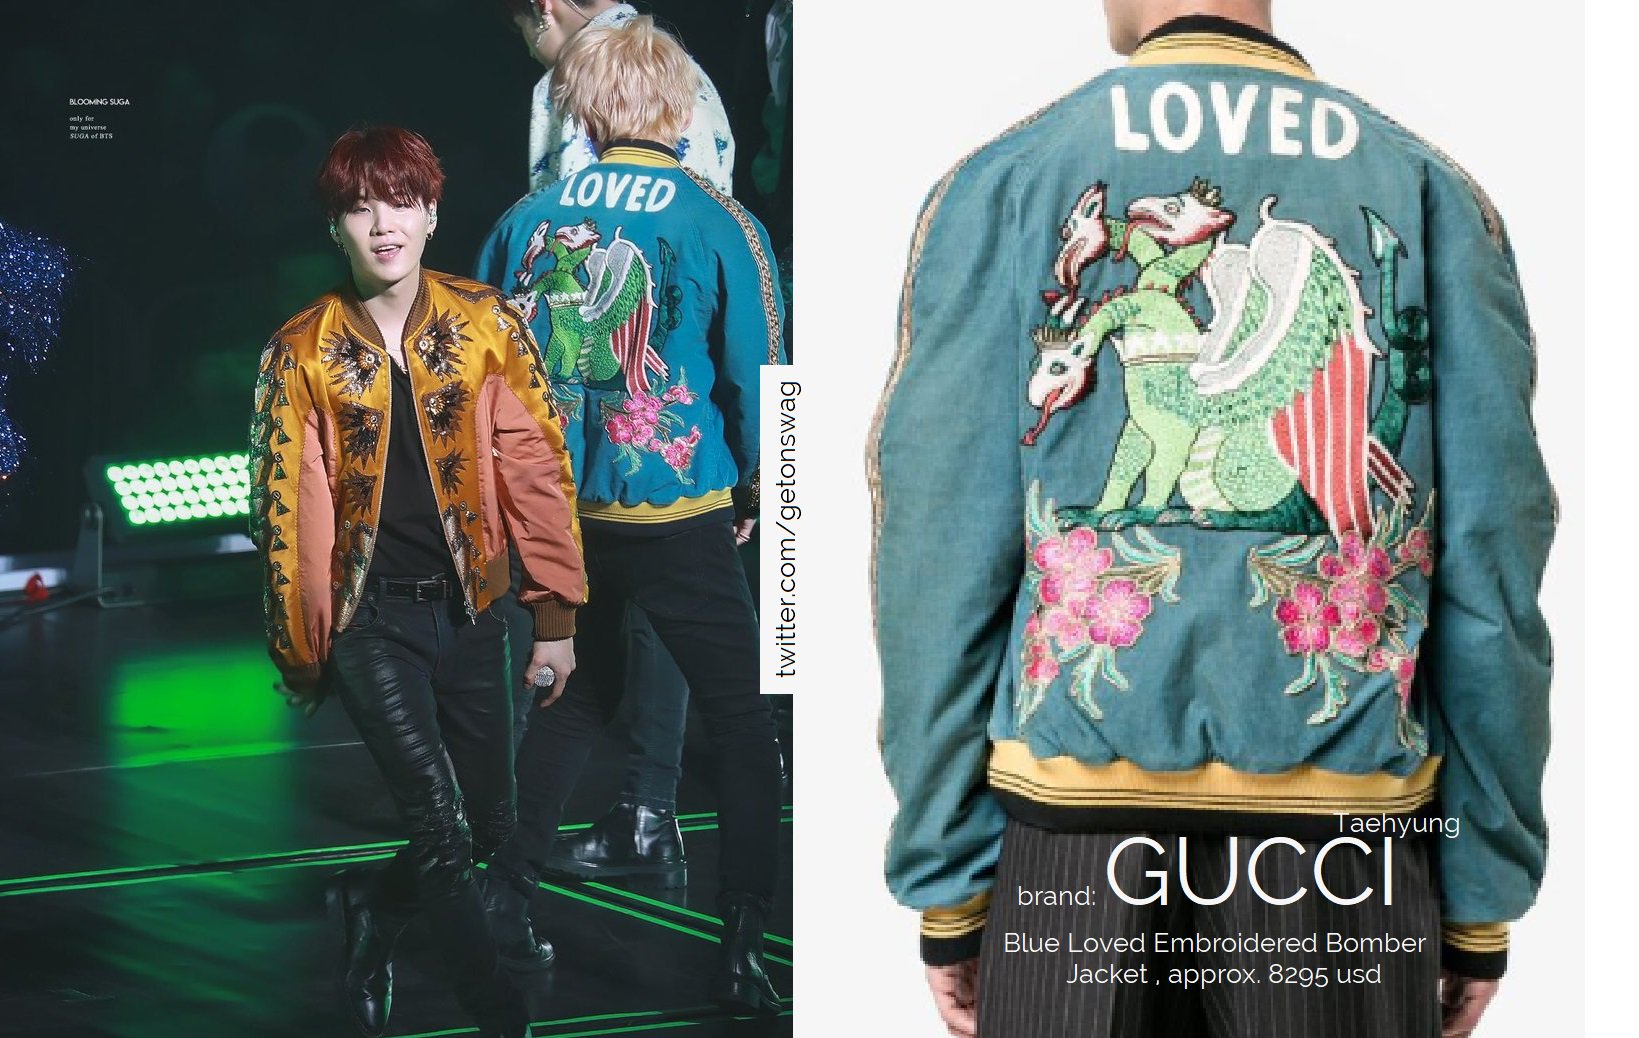 Beyond The Style Alex Equested Gucci Blue Loved Embroidered Bomber Jacket Approx 95 Usd Taehyung Bts Concert Taehyung V 태형 방탄소년단 T Co 9dcpvdwtfx